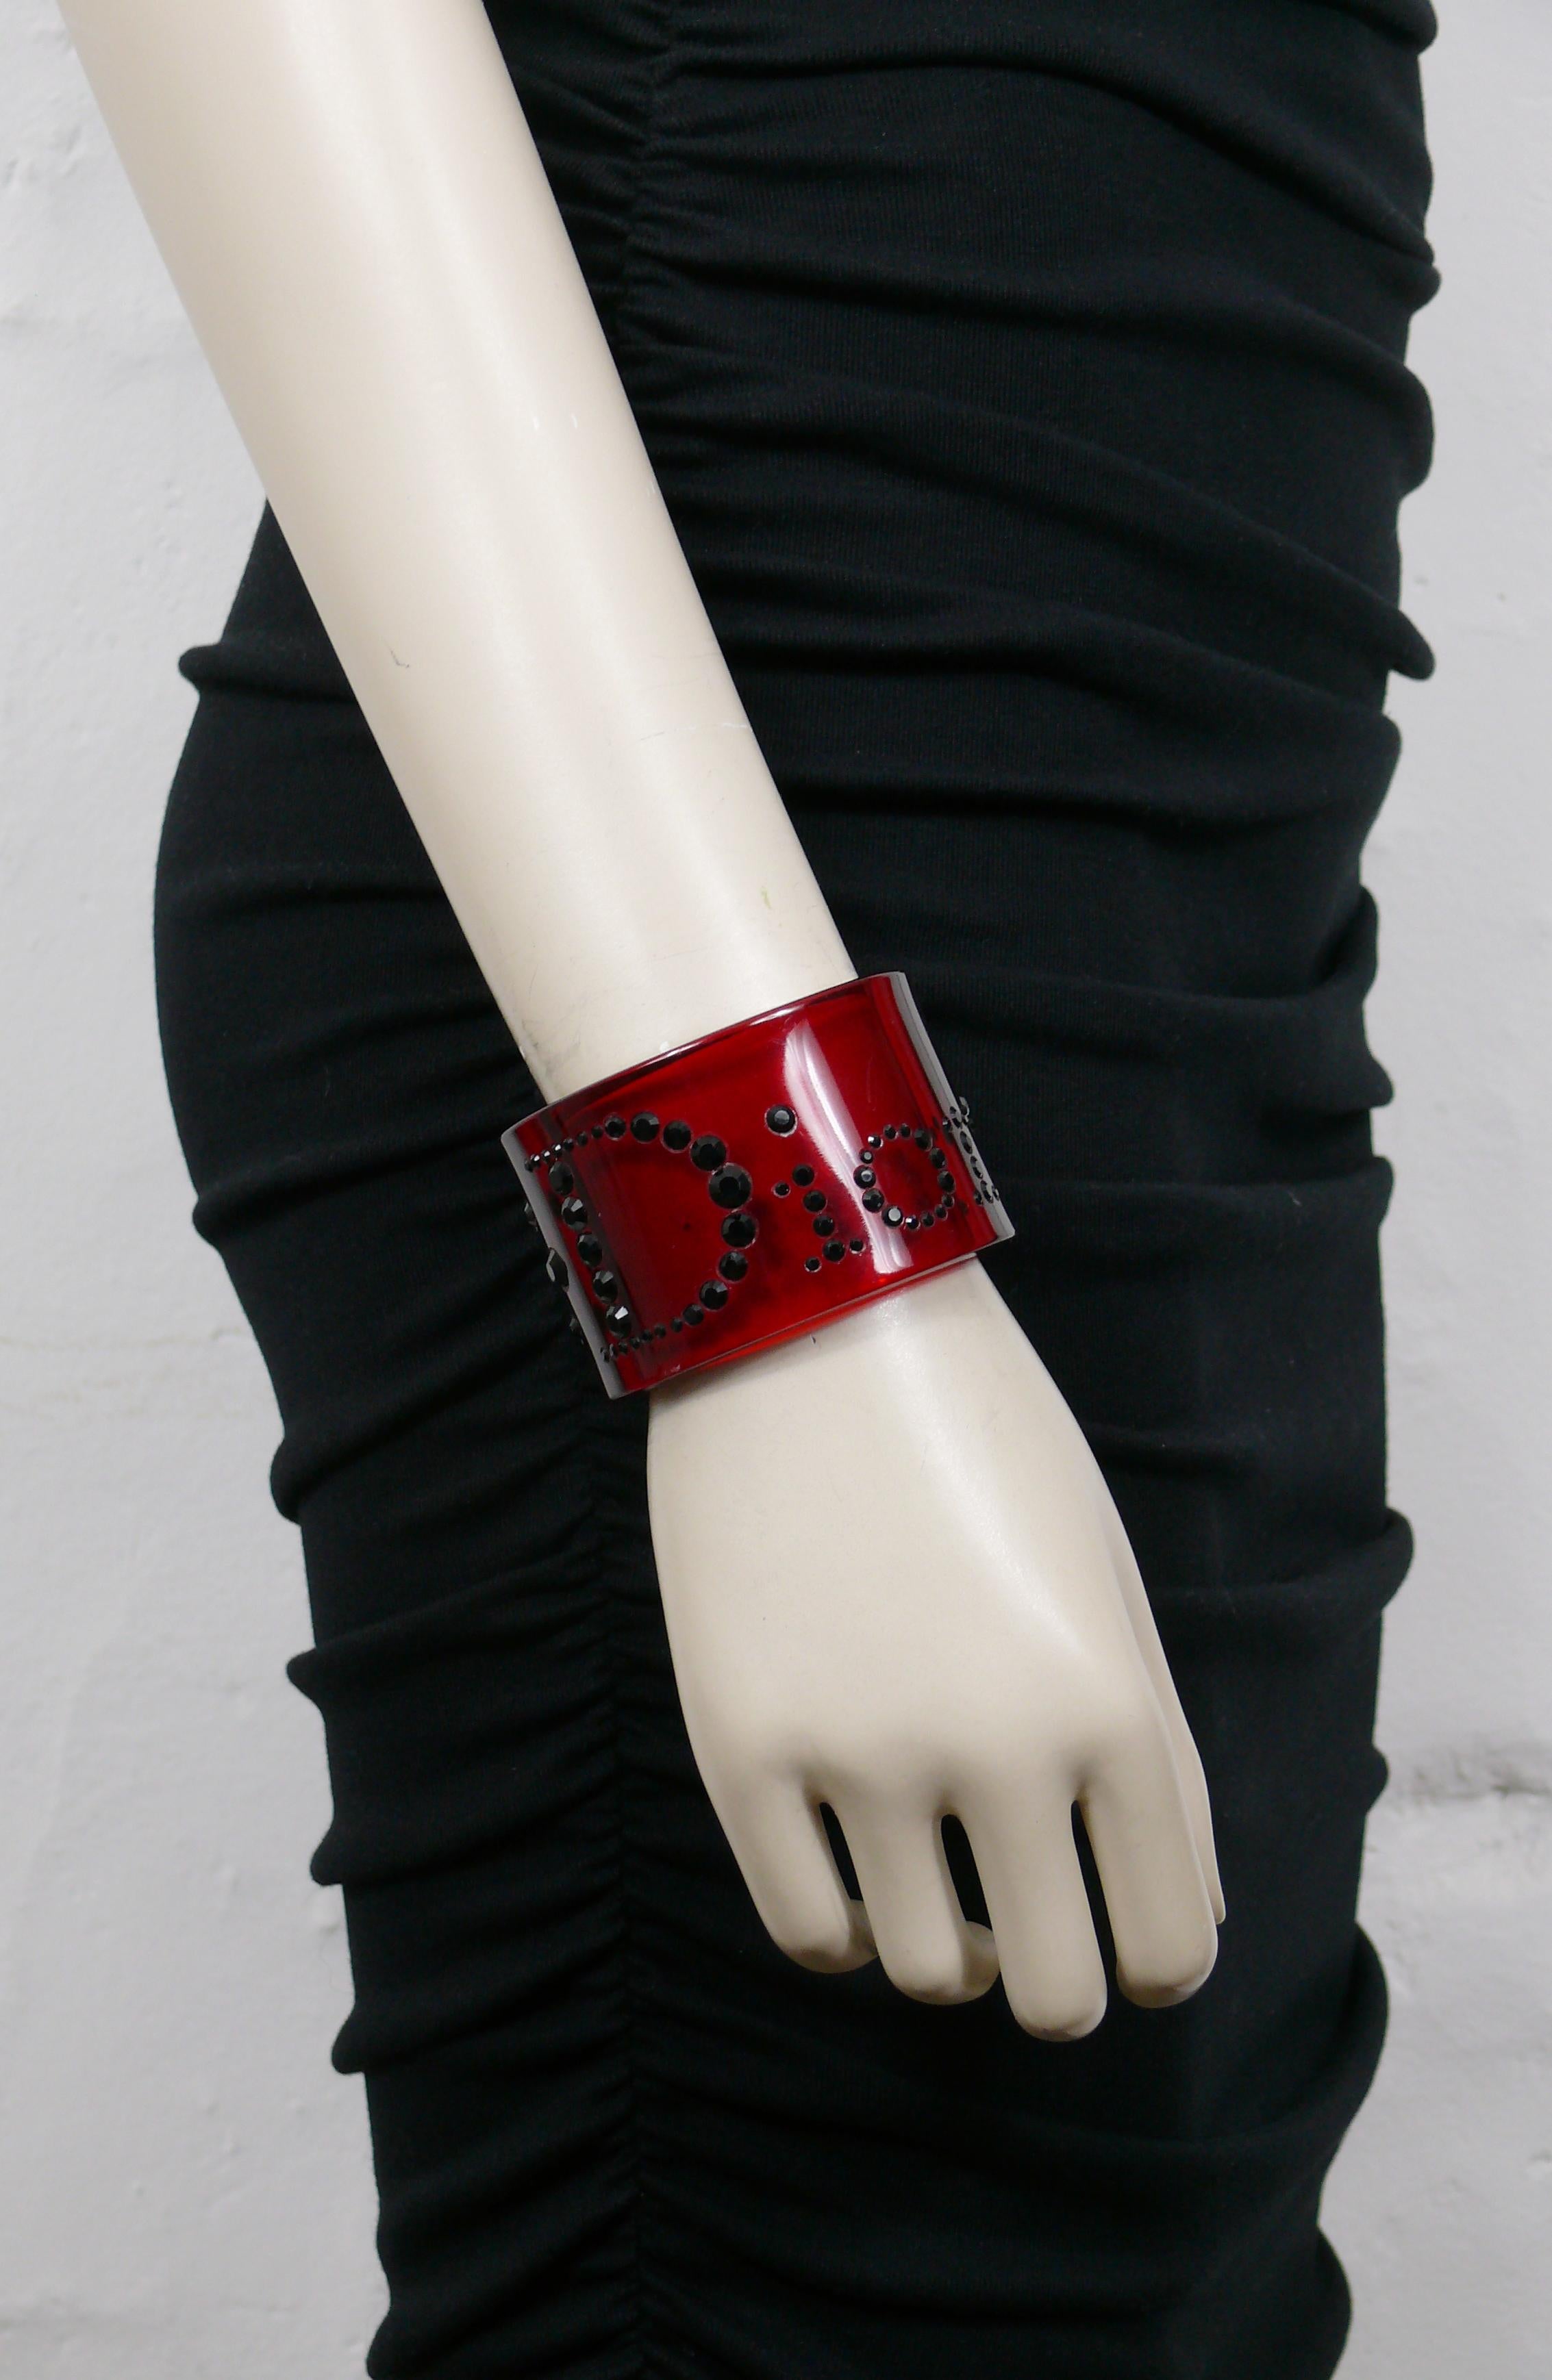 CHRISTIAN DIOR transparent red resin cuff bracelet embellished with jet black crystals forming the word DIOR.

Unmarked (usual for these models).

Indicative measurements : inner measurements approx. 5.5 cm x 4.5 cm (2.17 inches x 1.77 inches) /